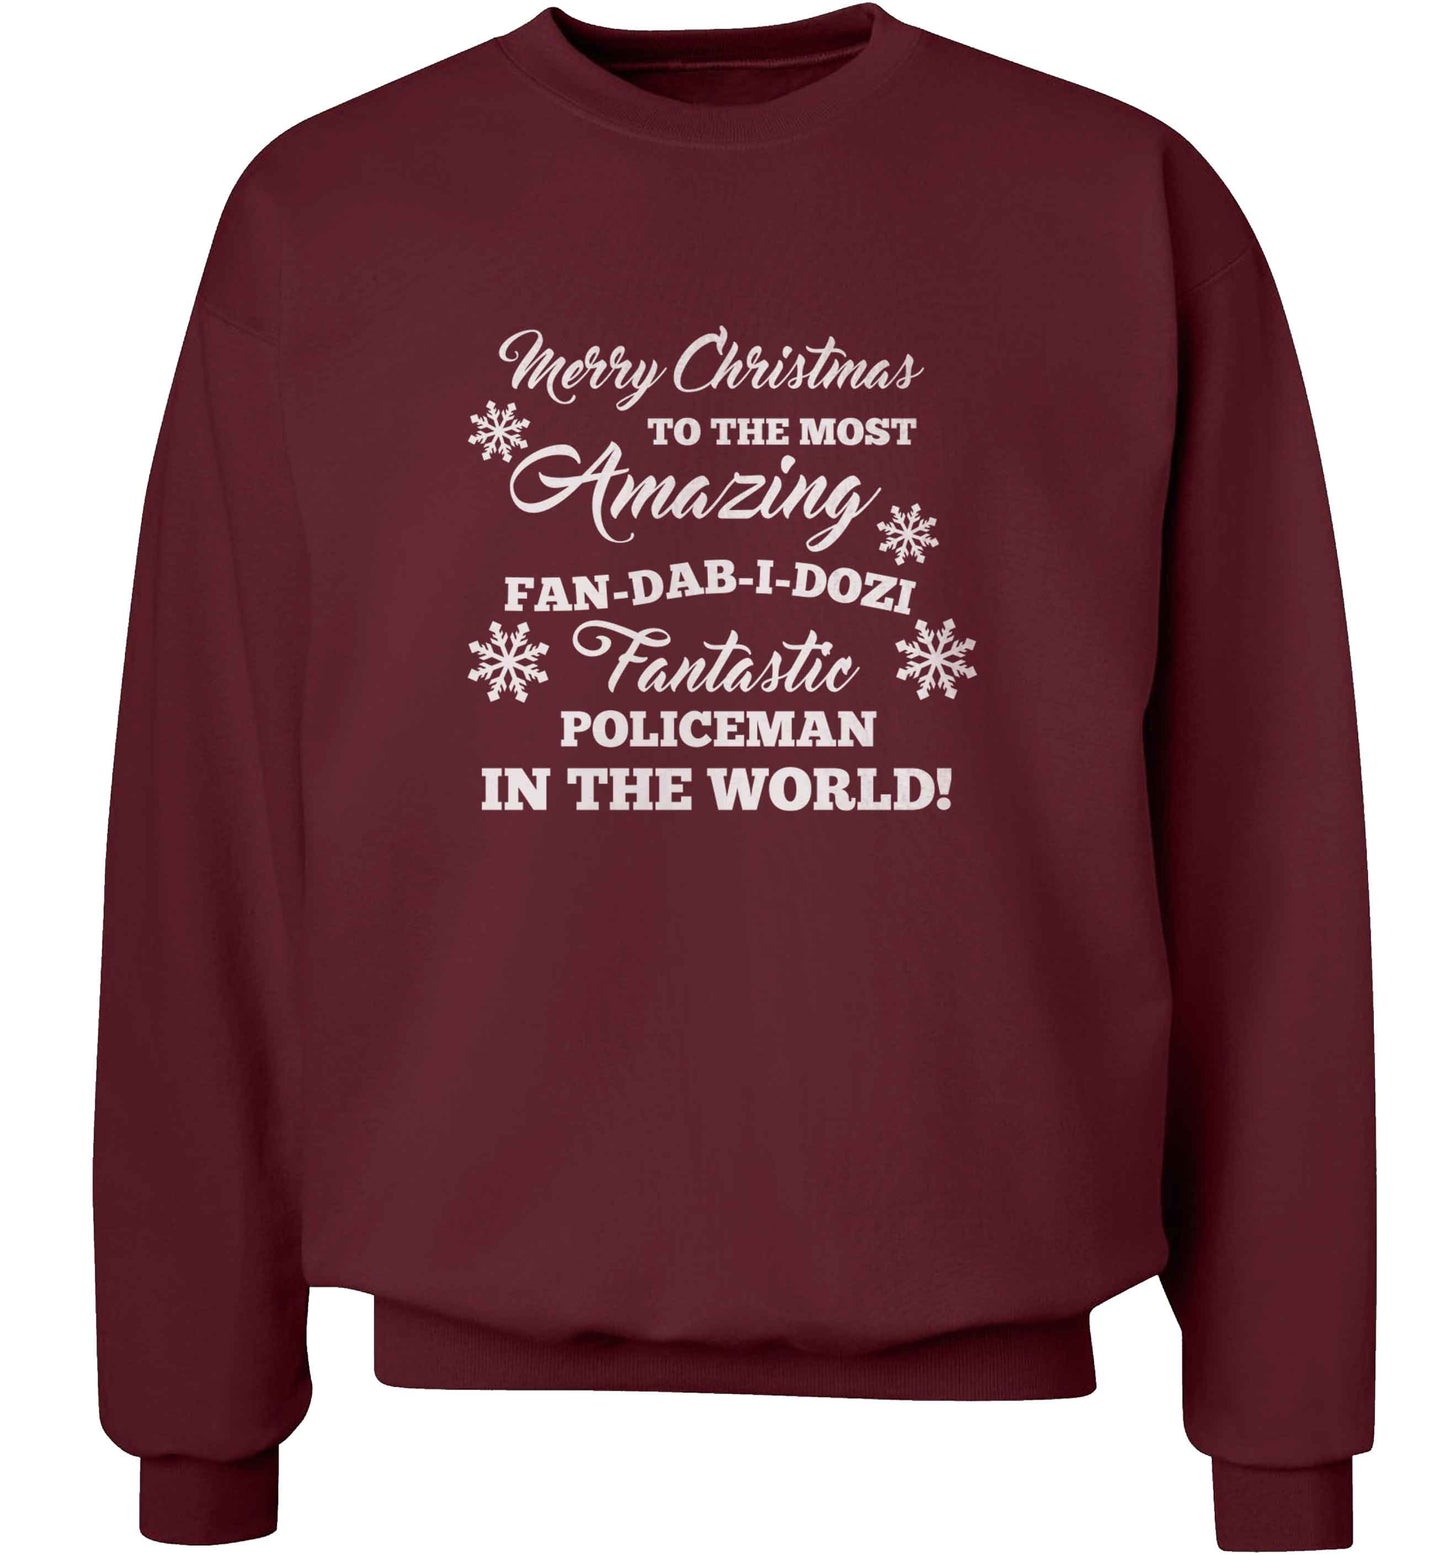 Merry Christmas to the most amazing policeman in the world! adult's unisex maroon sweater 2XL